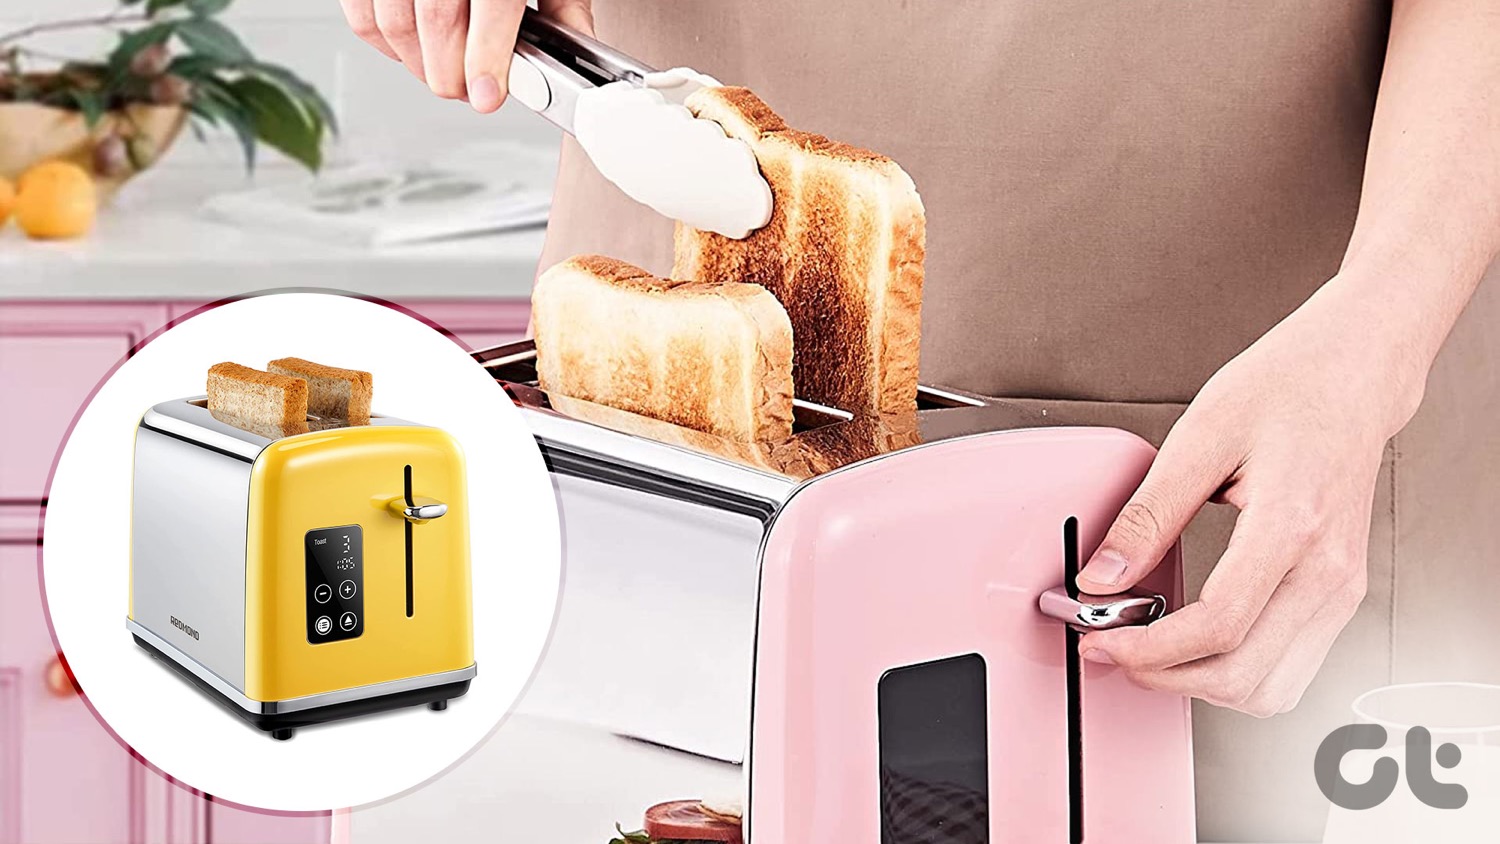 Top Smart Bread Toasters With Screens